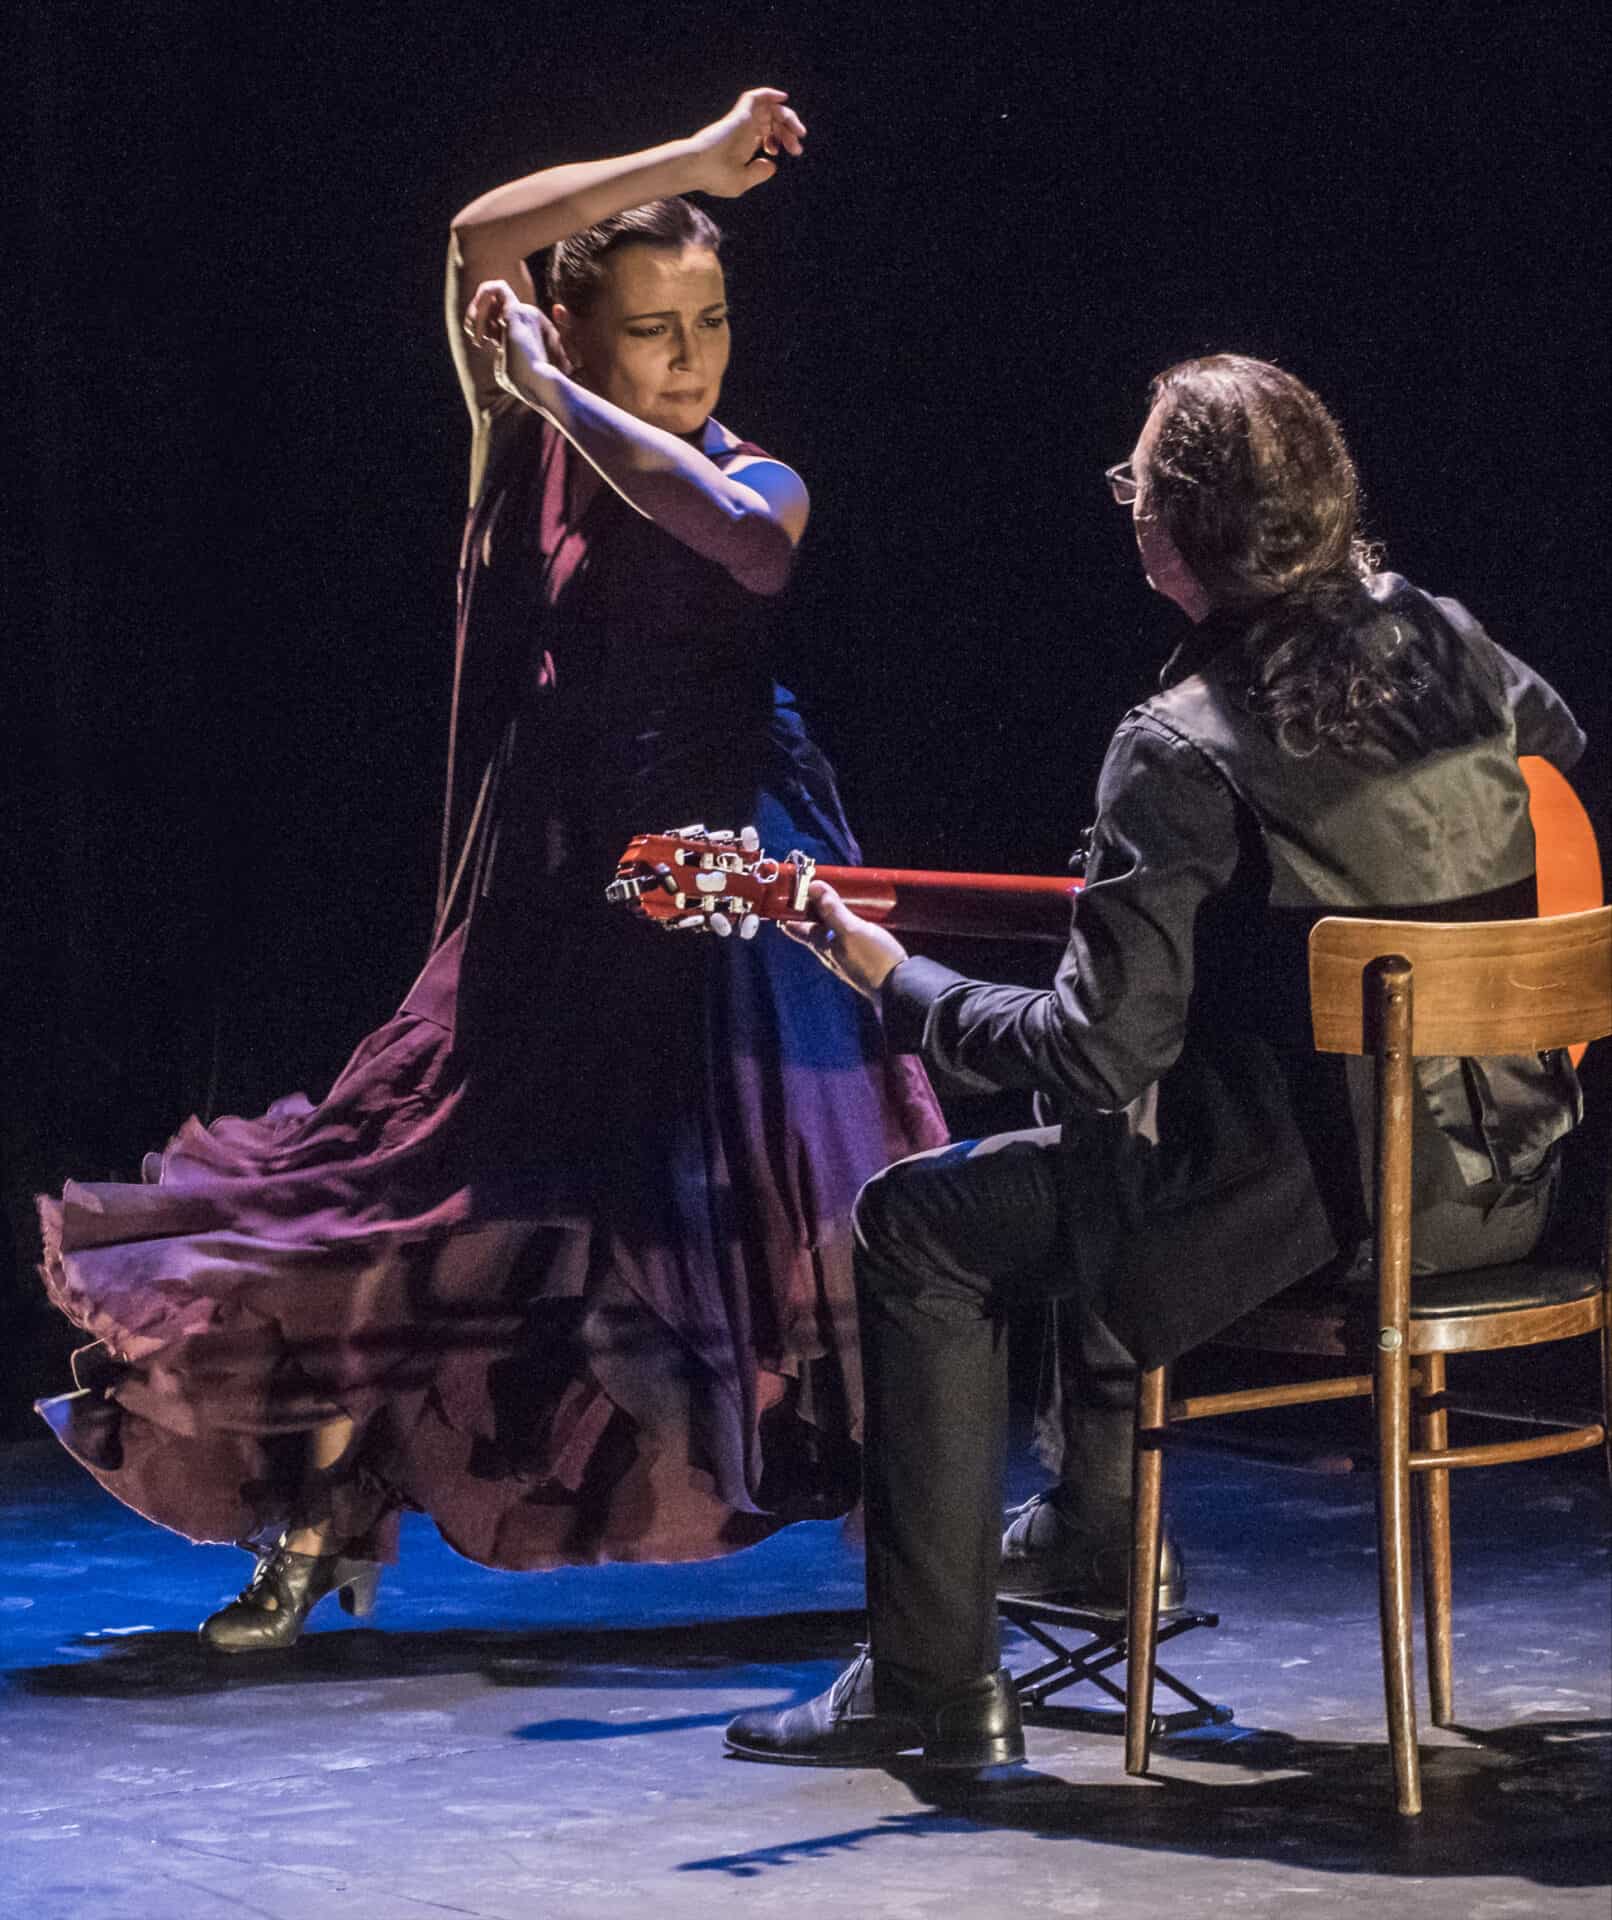 Noche Flamenca, led by Soledad Barrio, will perform as artists in residence. Press photo courtesy of Williams College